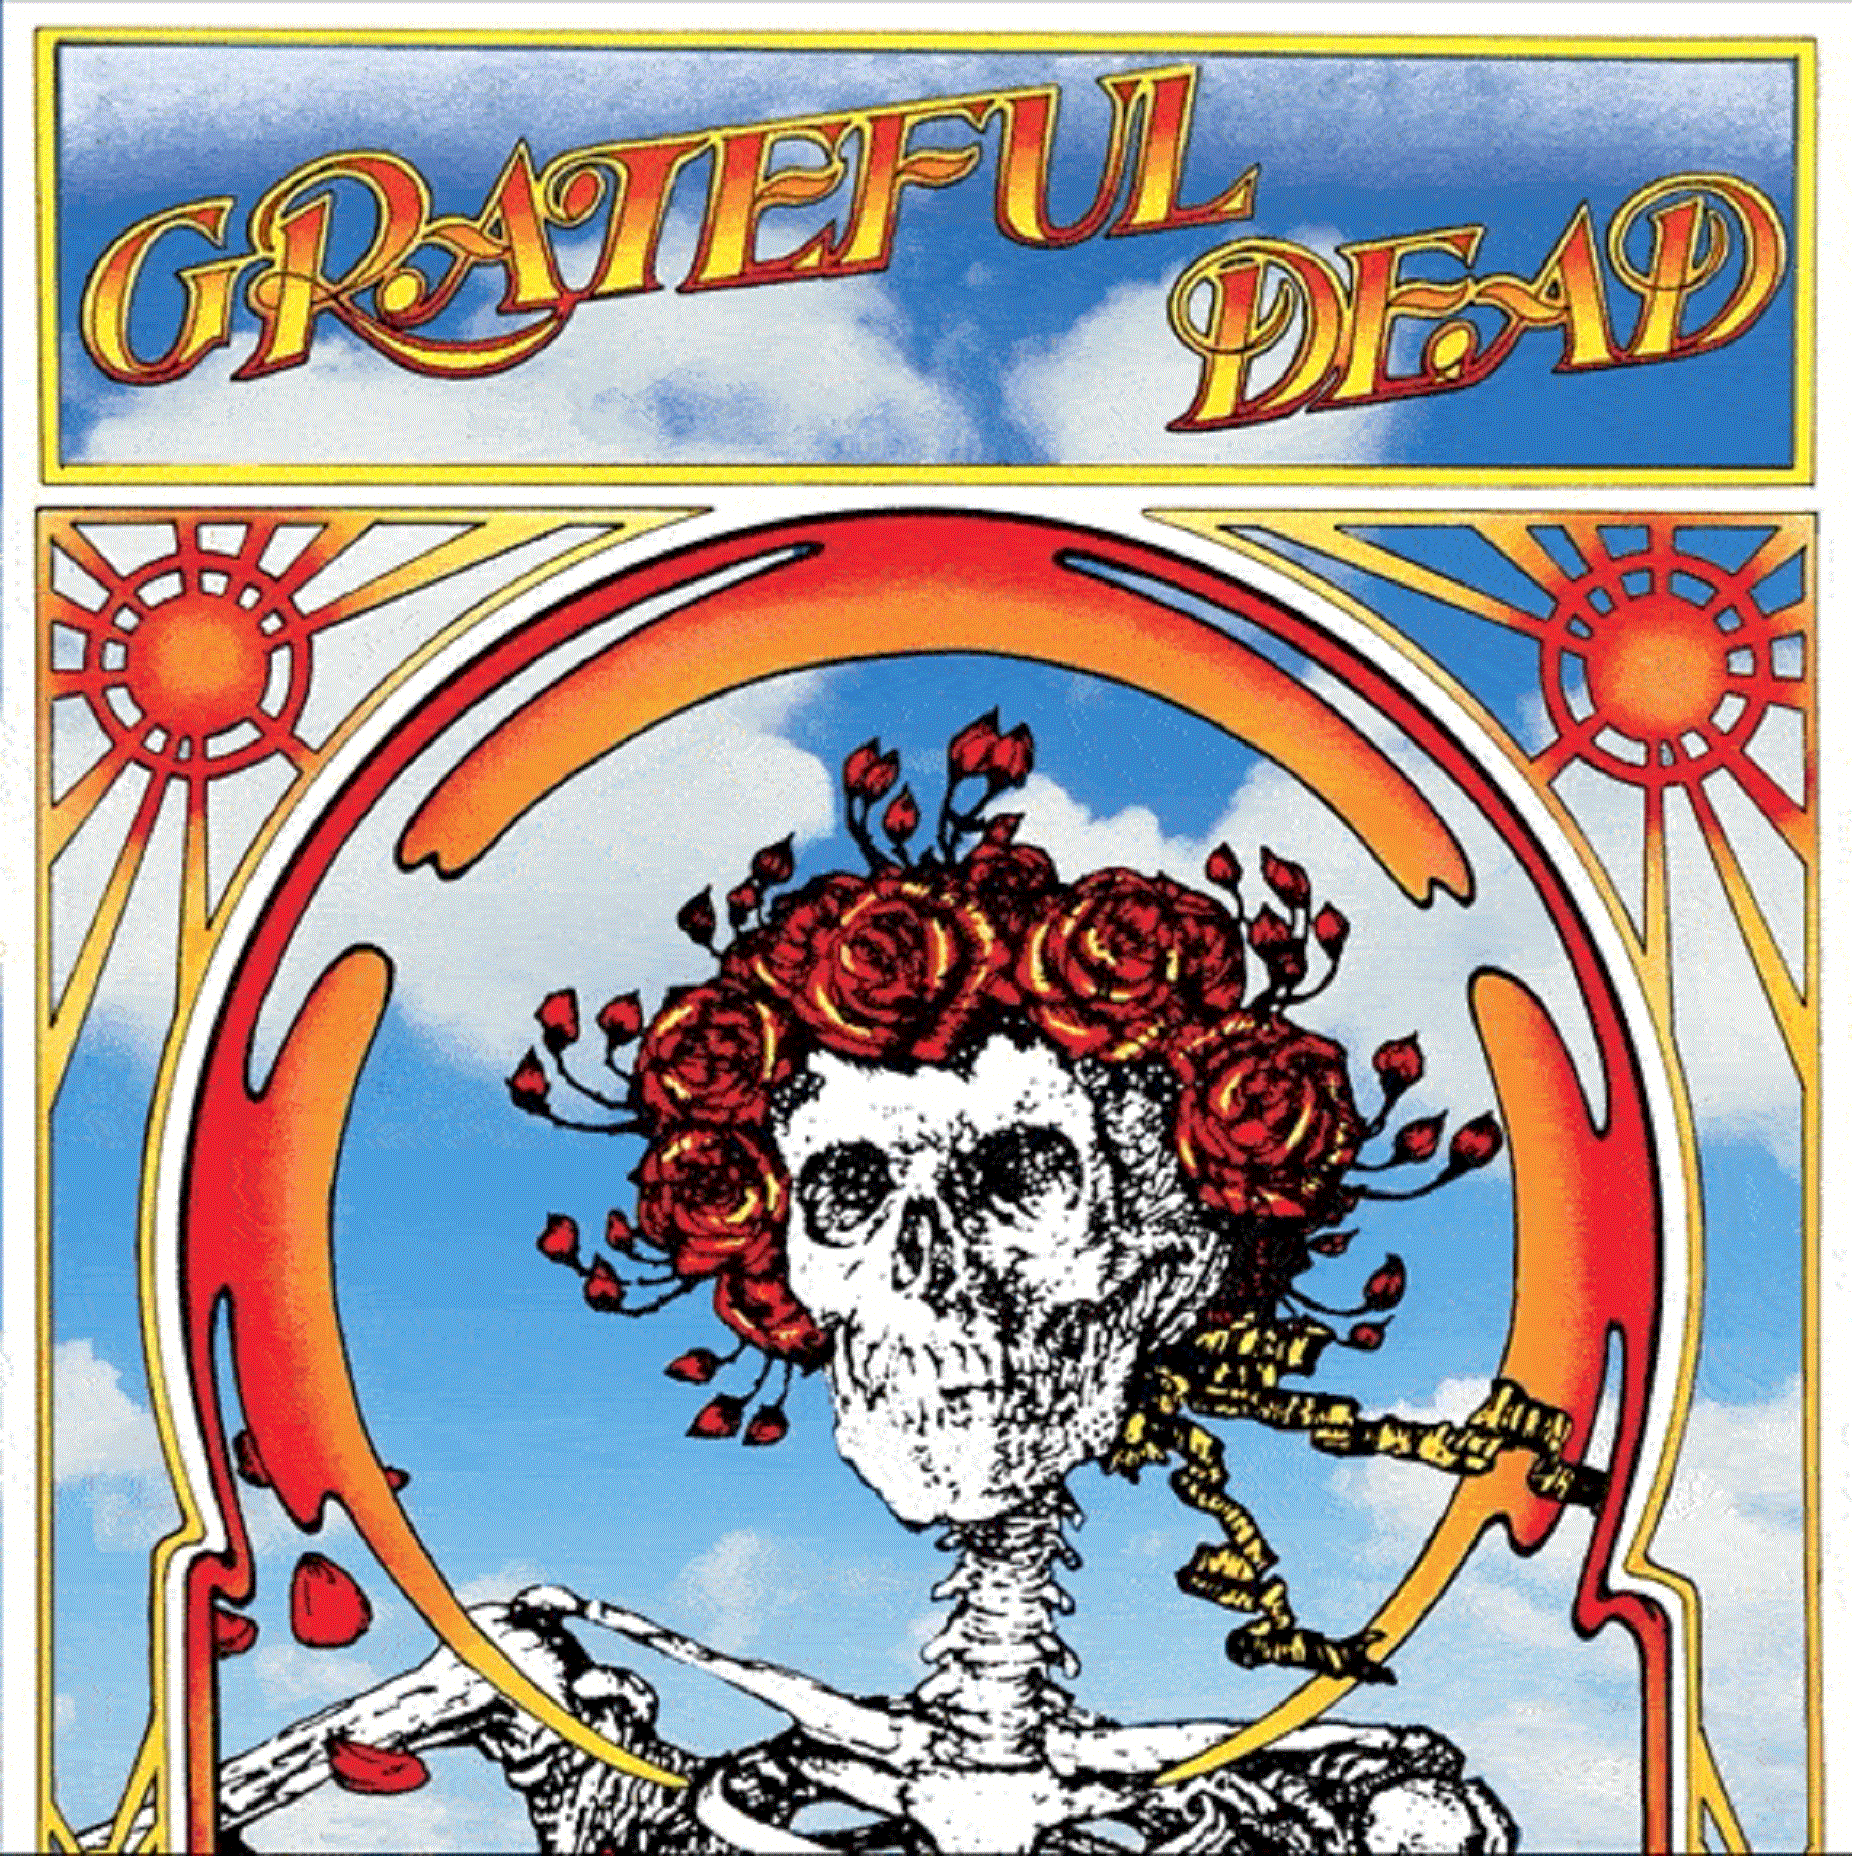 Now Available: Skull & Roses (50th Anniversary Expanded Edition)